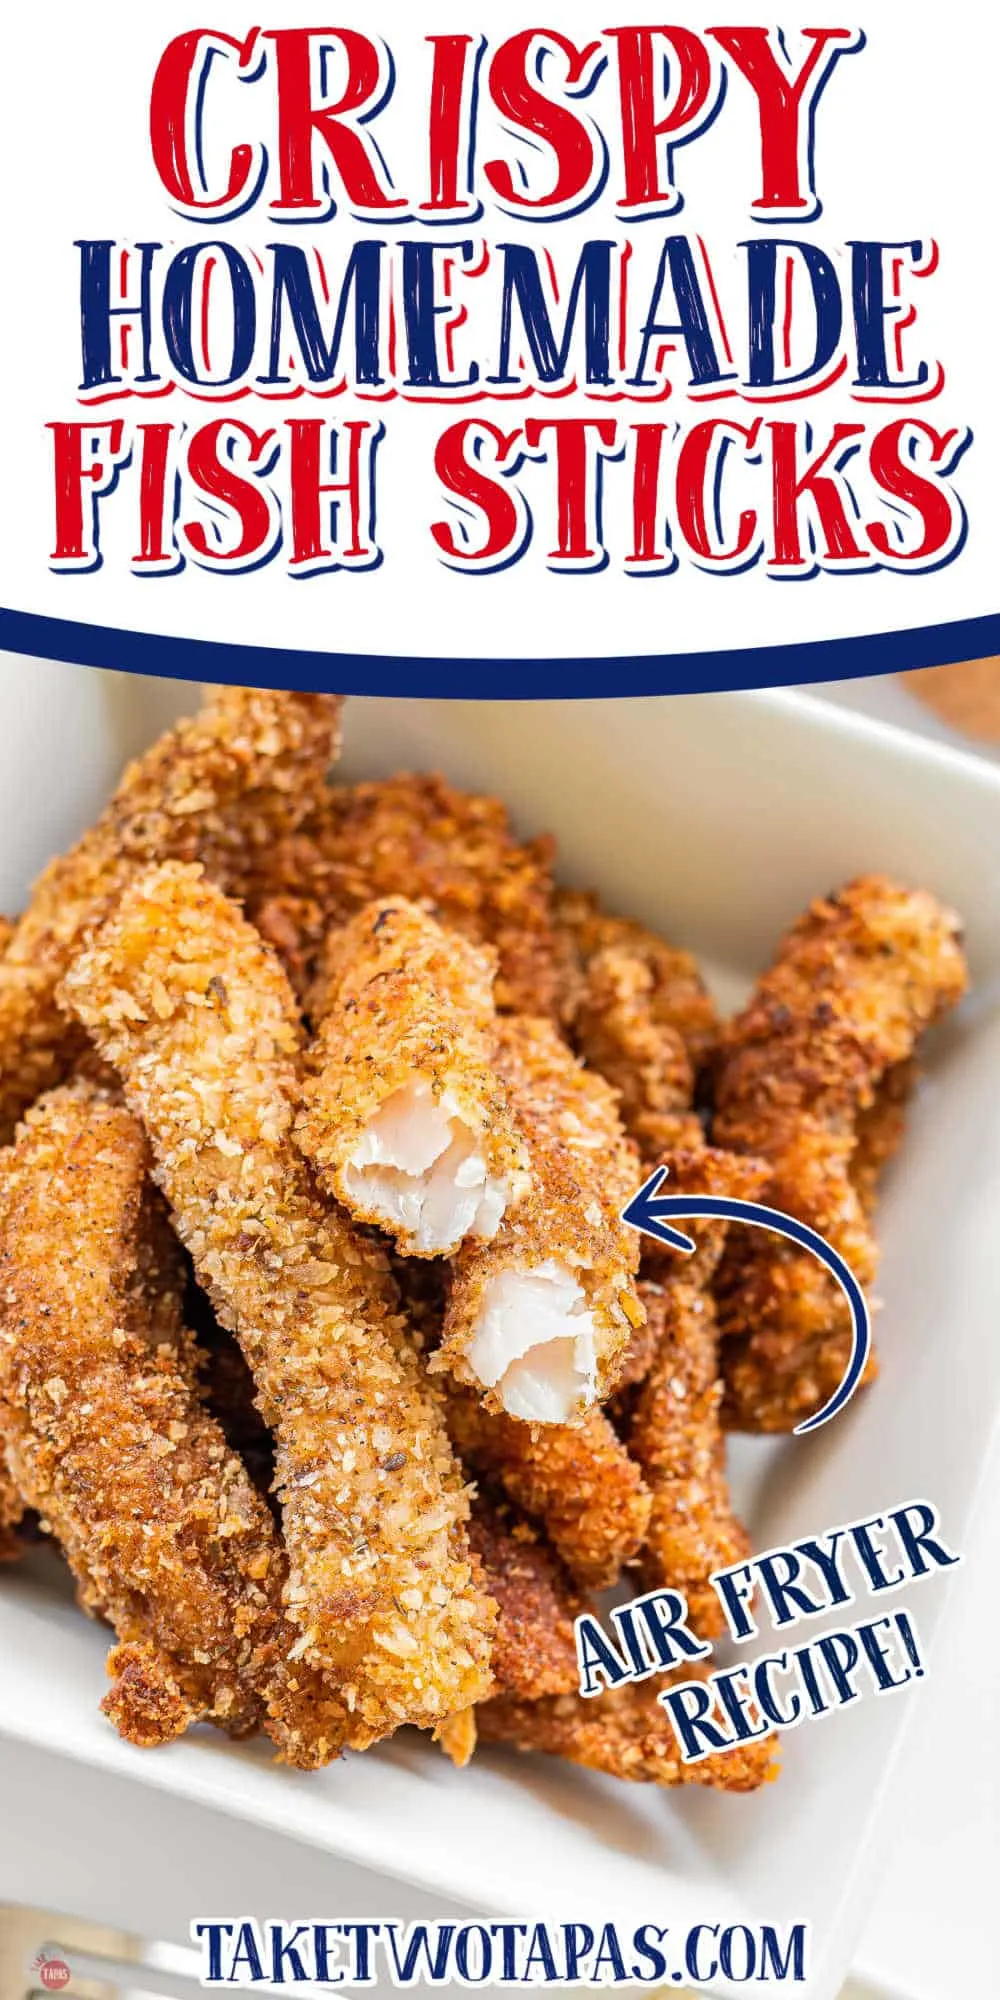 bowl of fish sticks with text "air fryer recipe"